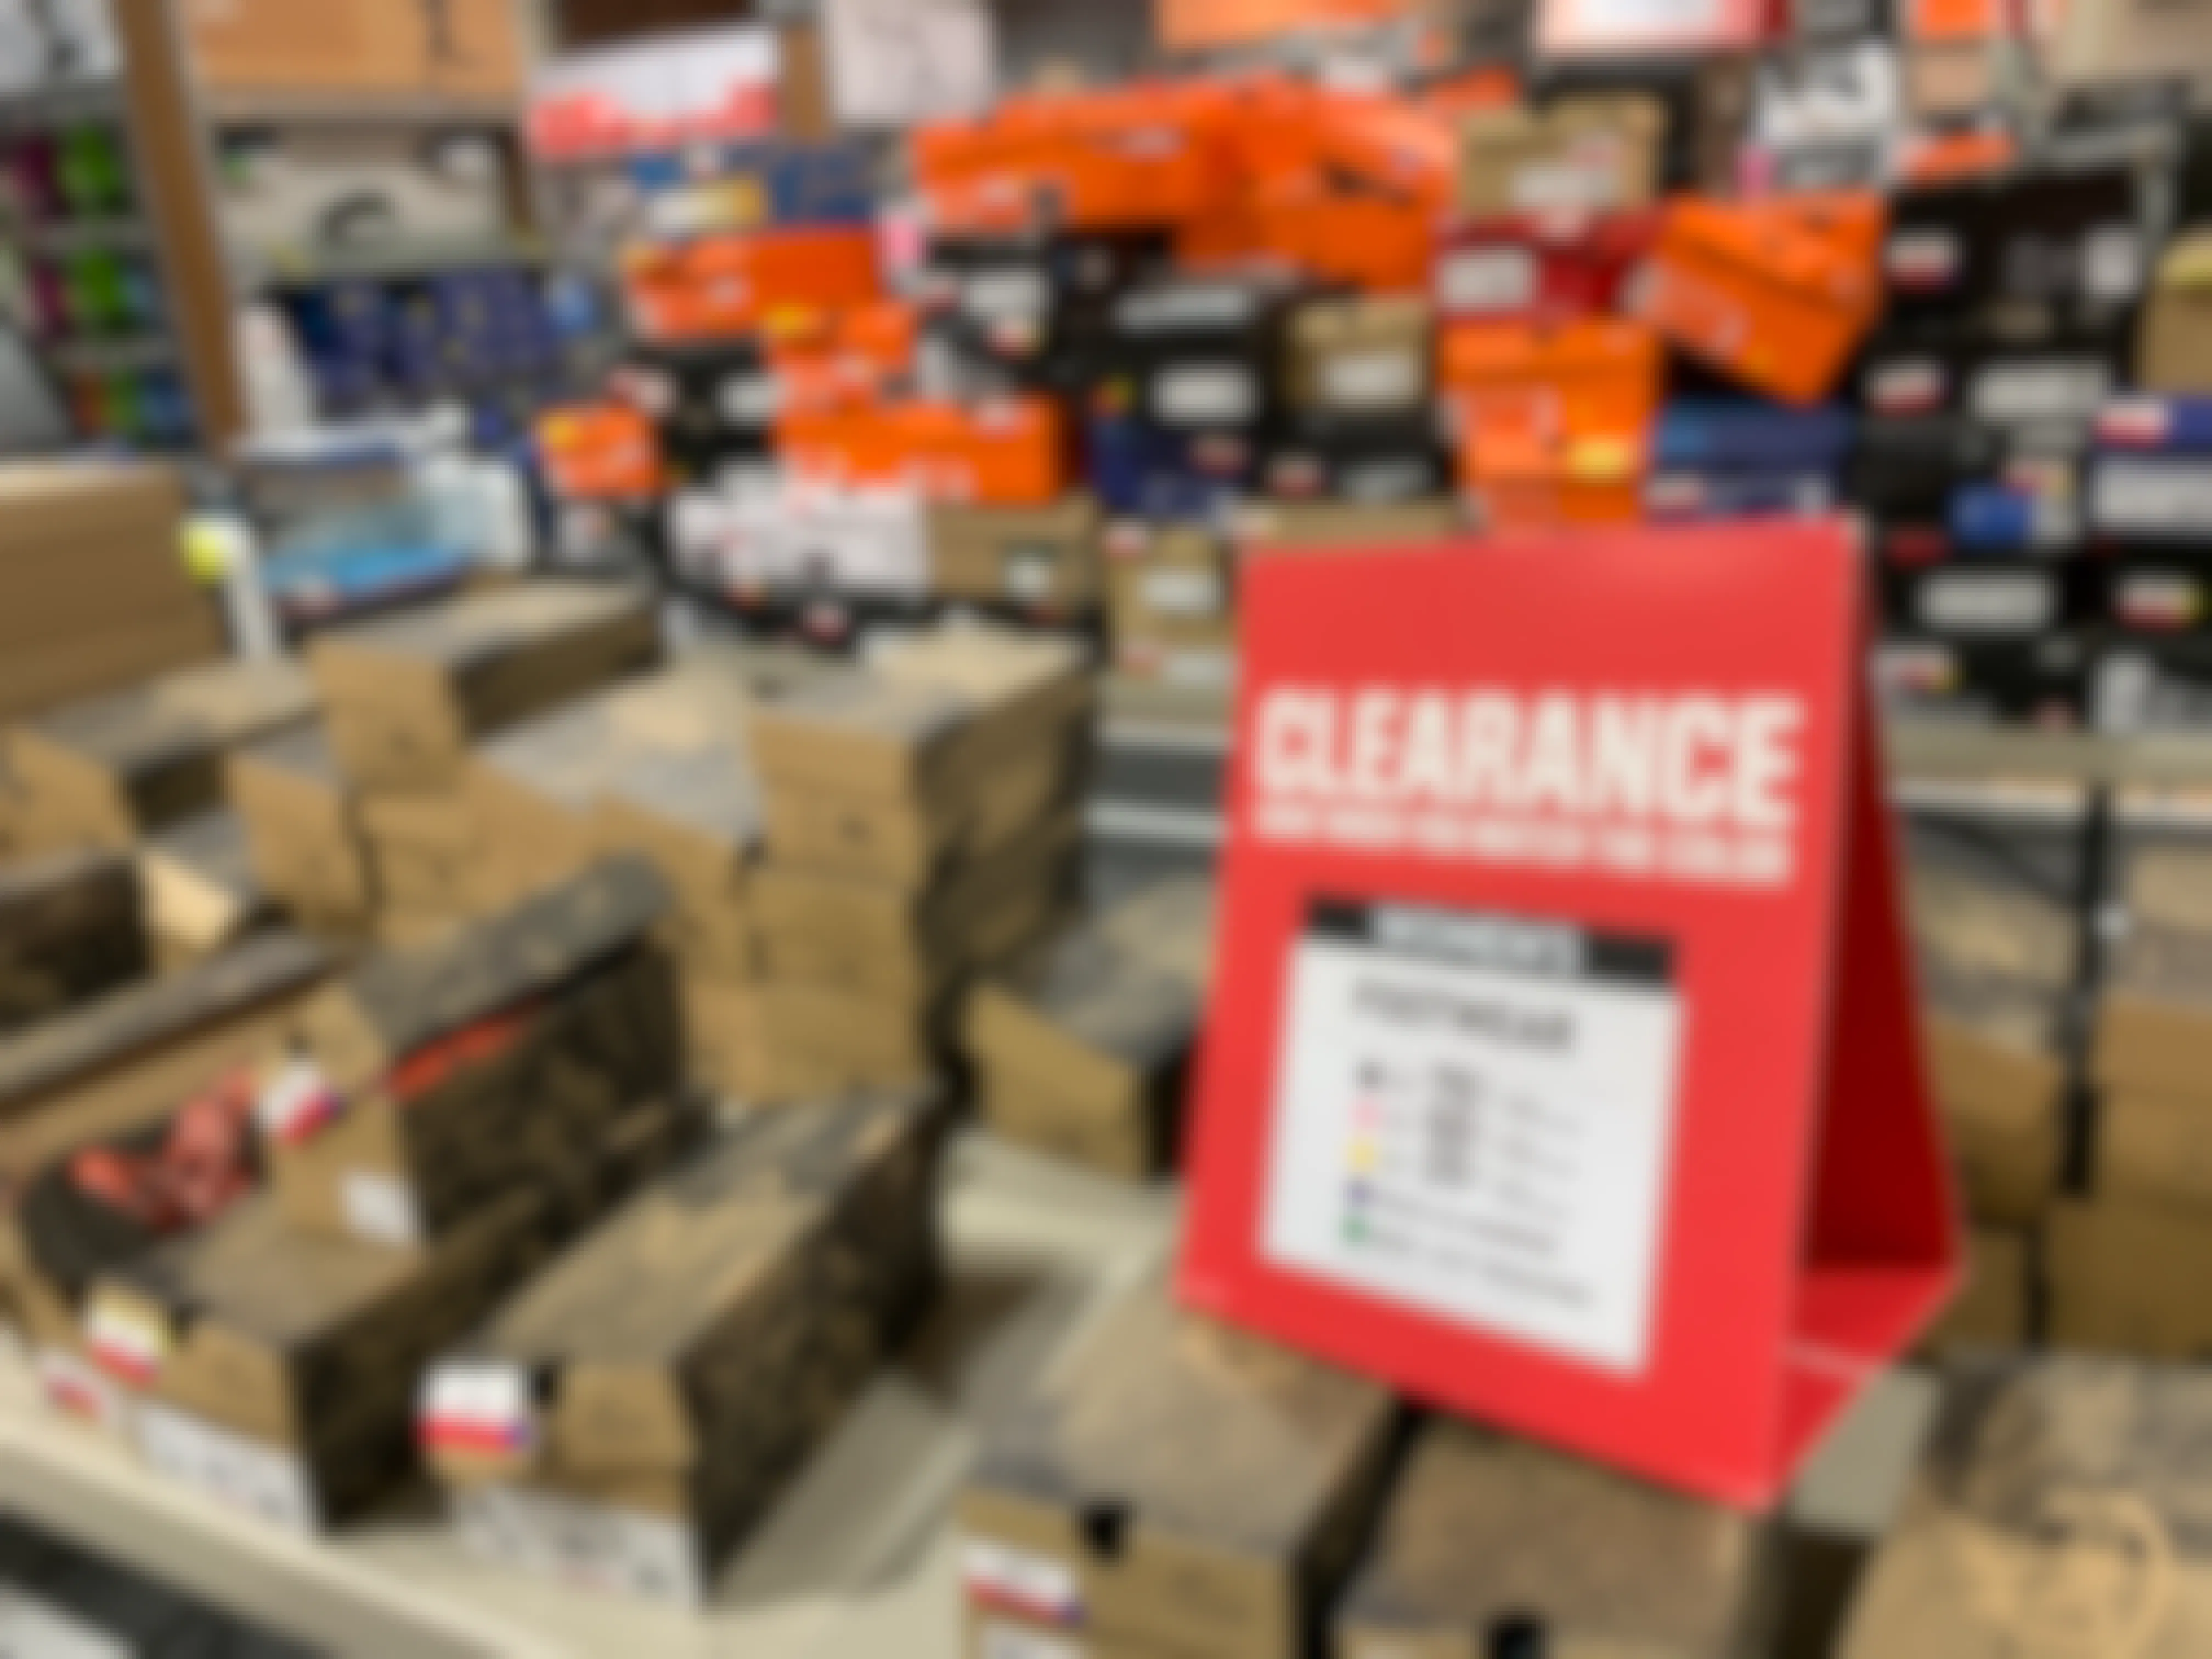 Two tables stacked with shoe boxes and a Clearance sign with information about the prices and clearance colors.